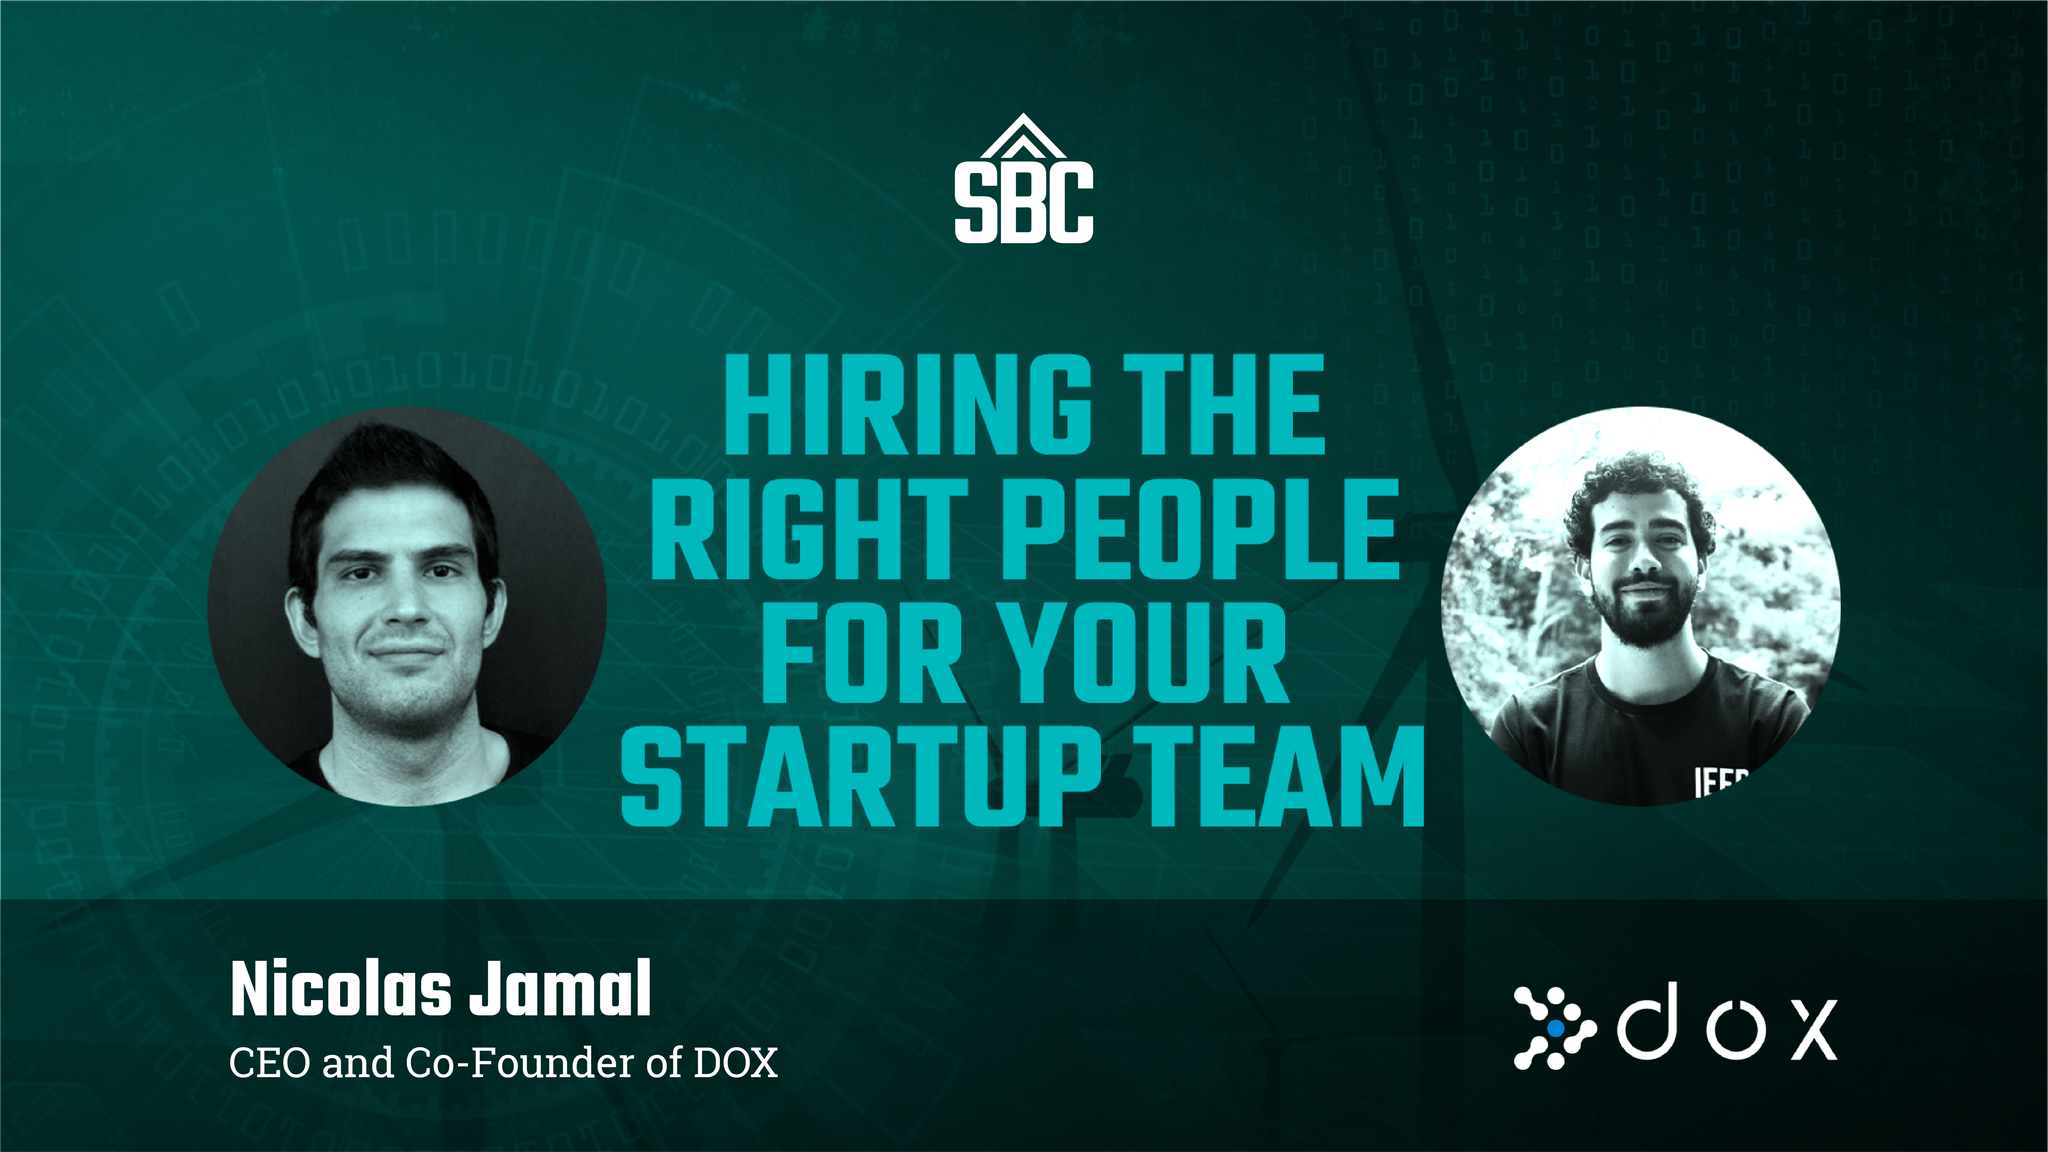 Hiring the right people for your startup team - Nicolas Jamal, Dox